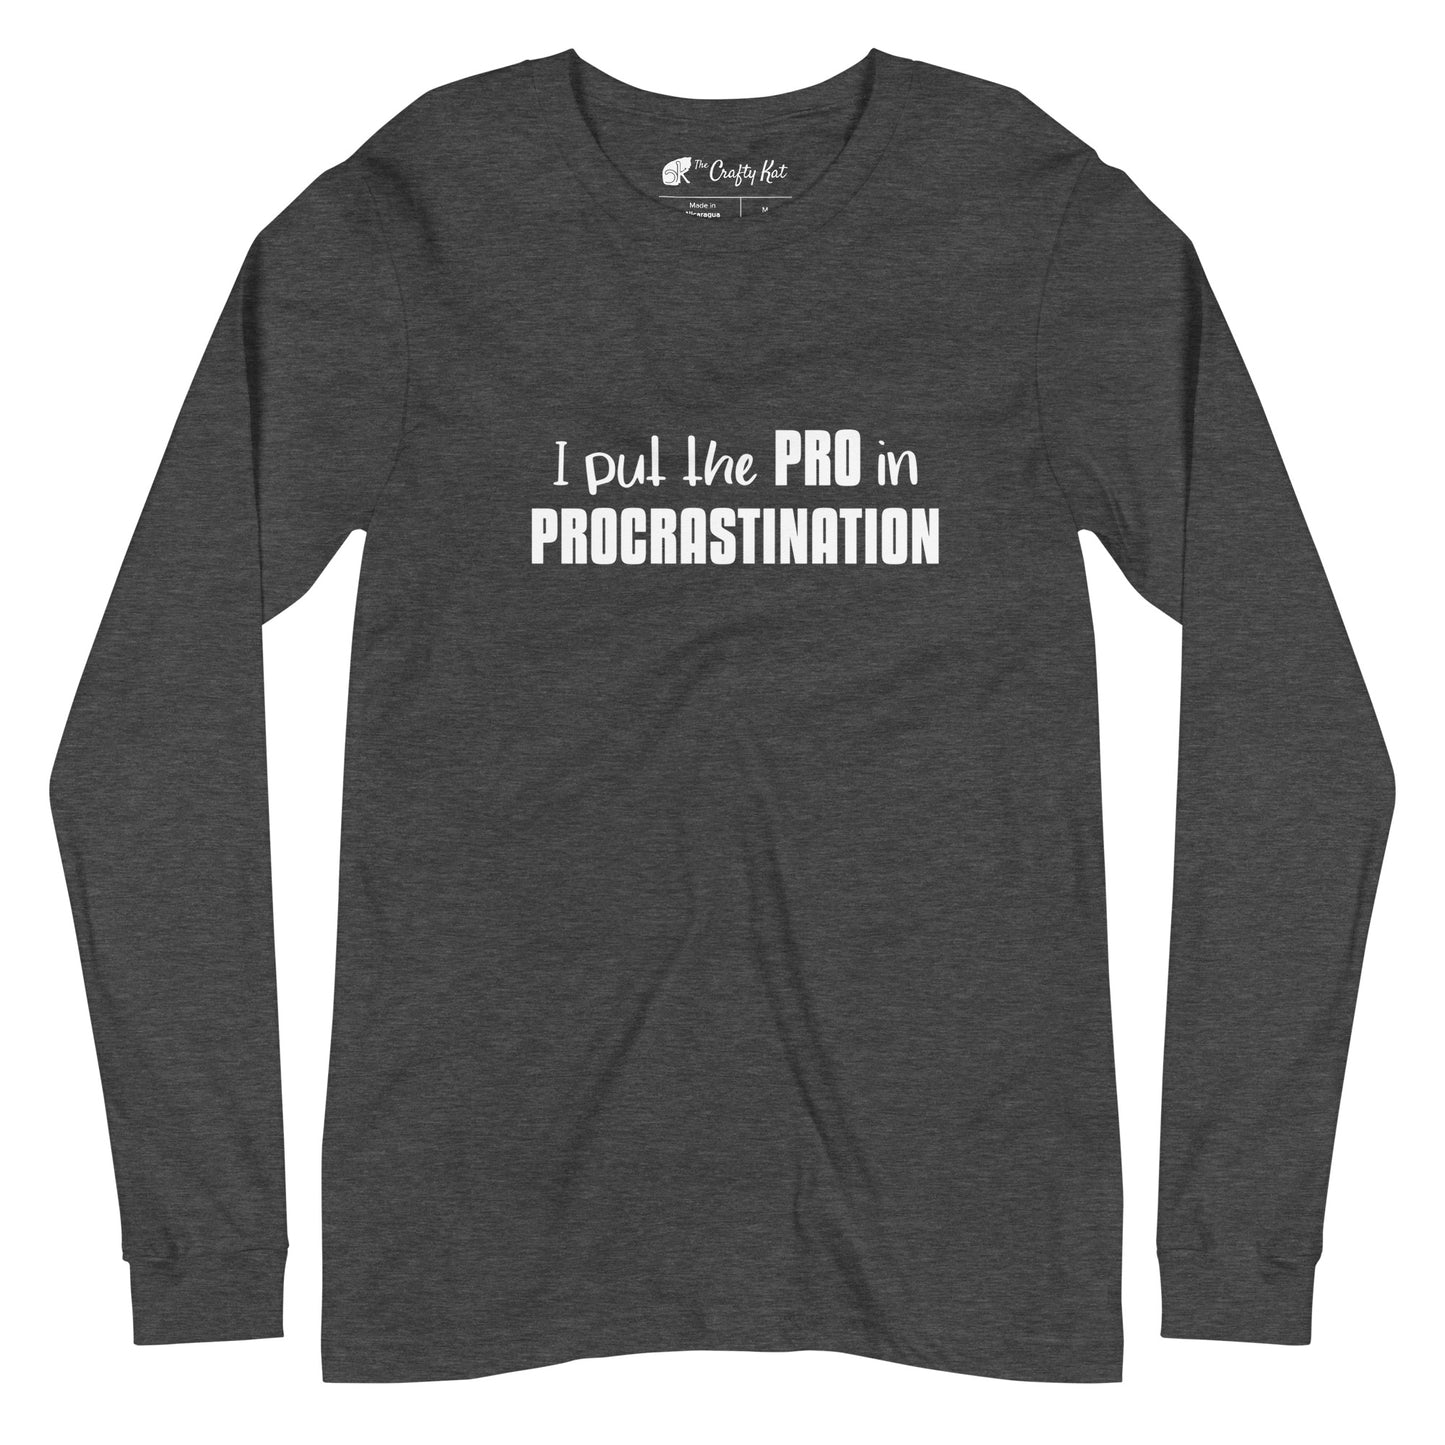 Dark Grey Heather long-sleeve shirt with text graphic: "I put the PRO in PROCRASTINATION"